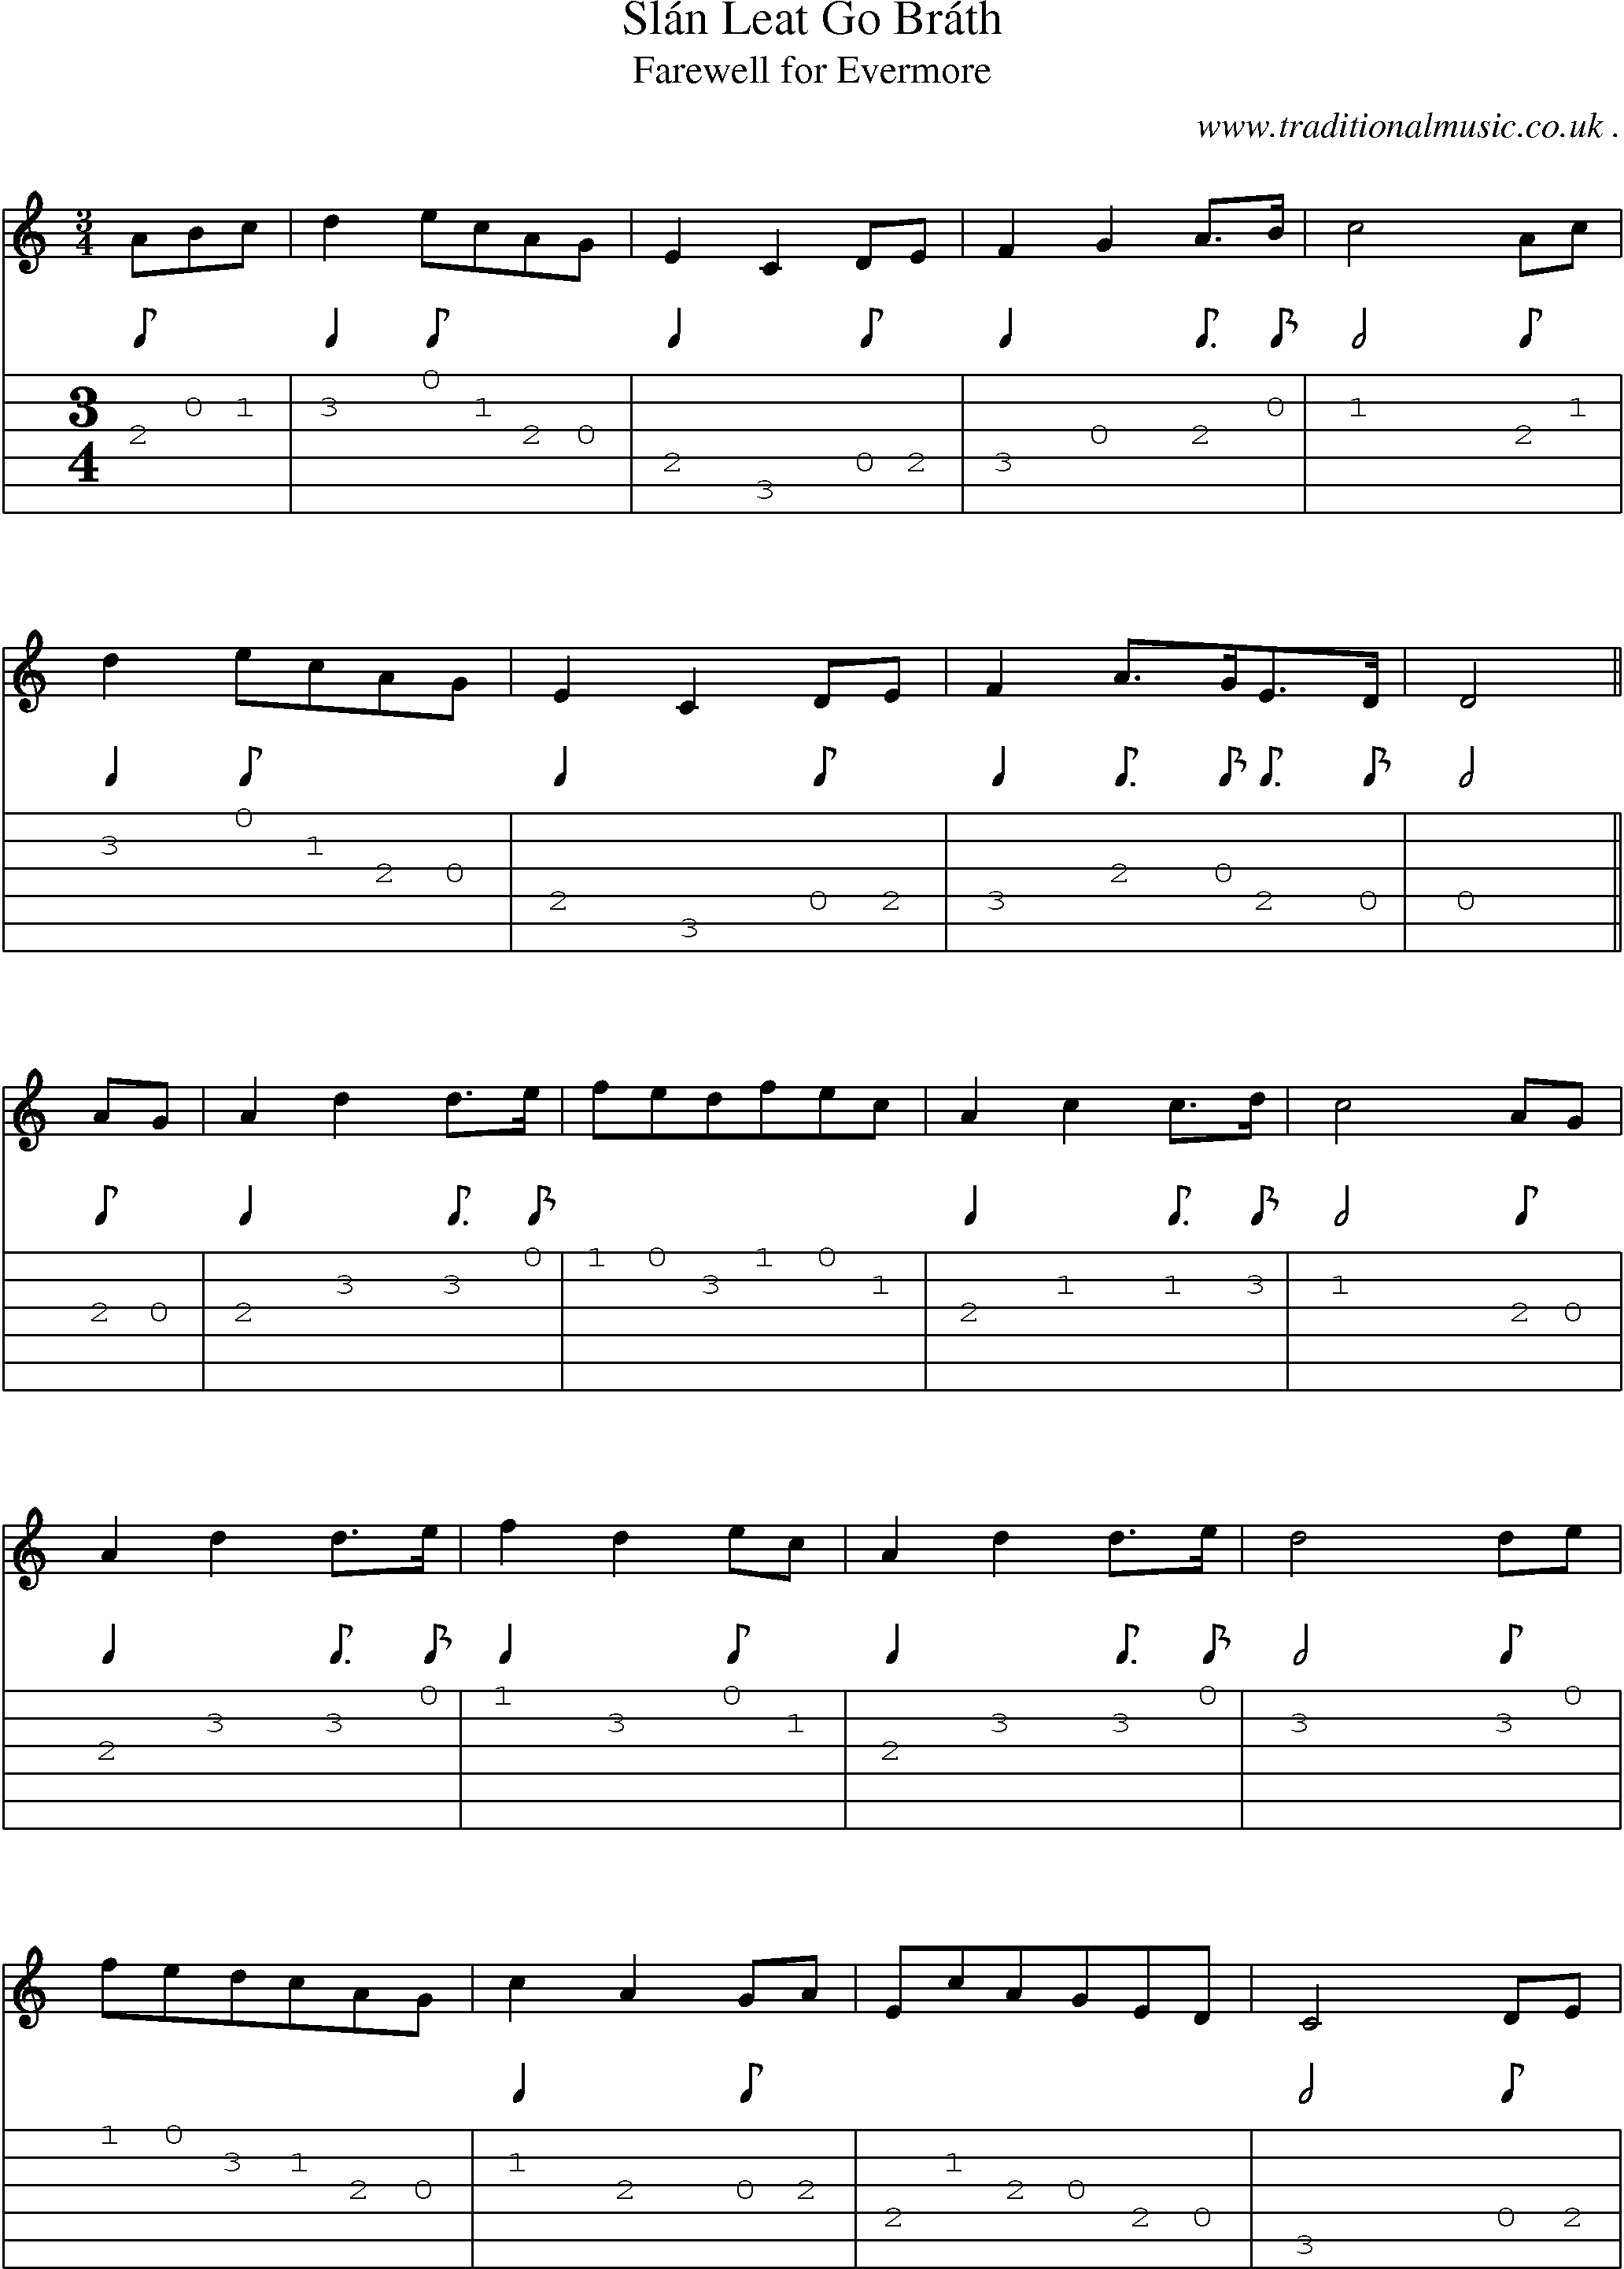 Sheet-Music and Guitar Tabs for Slan Leat Go Brath